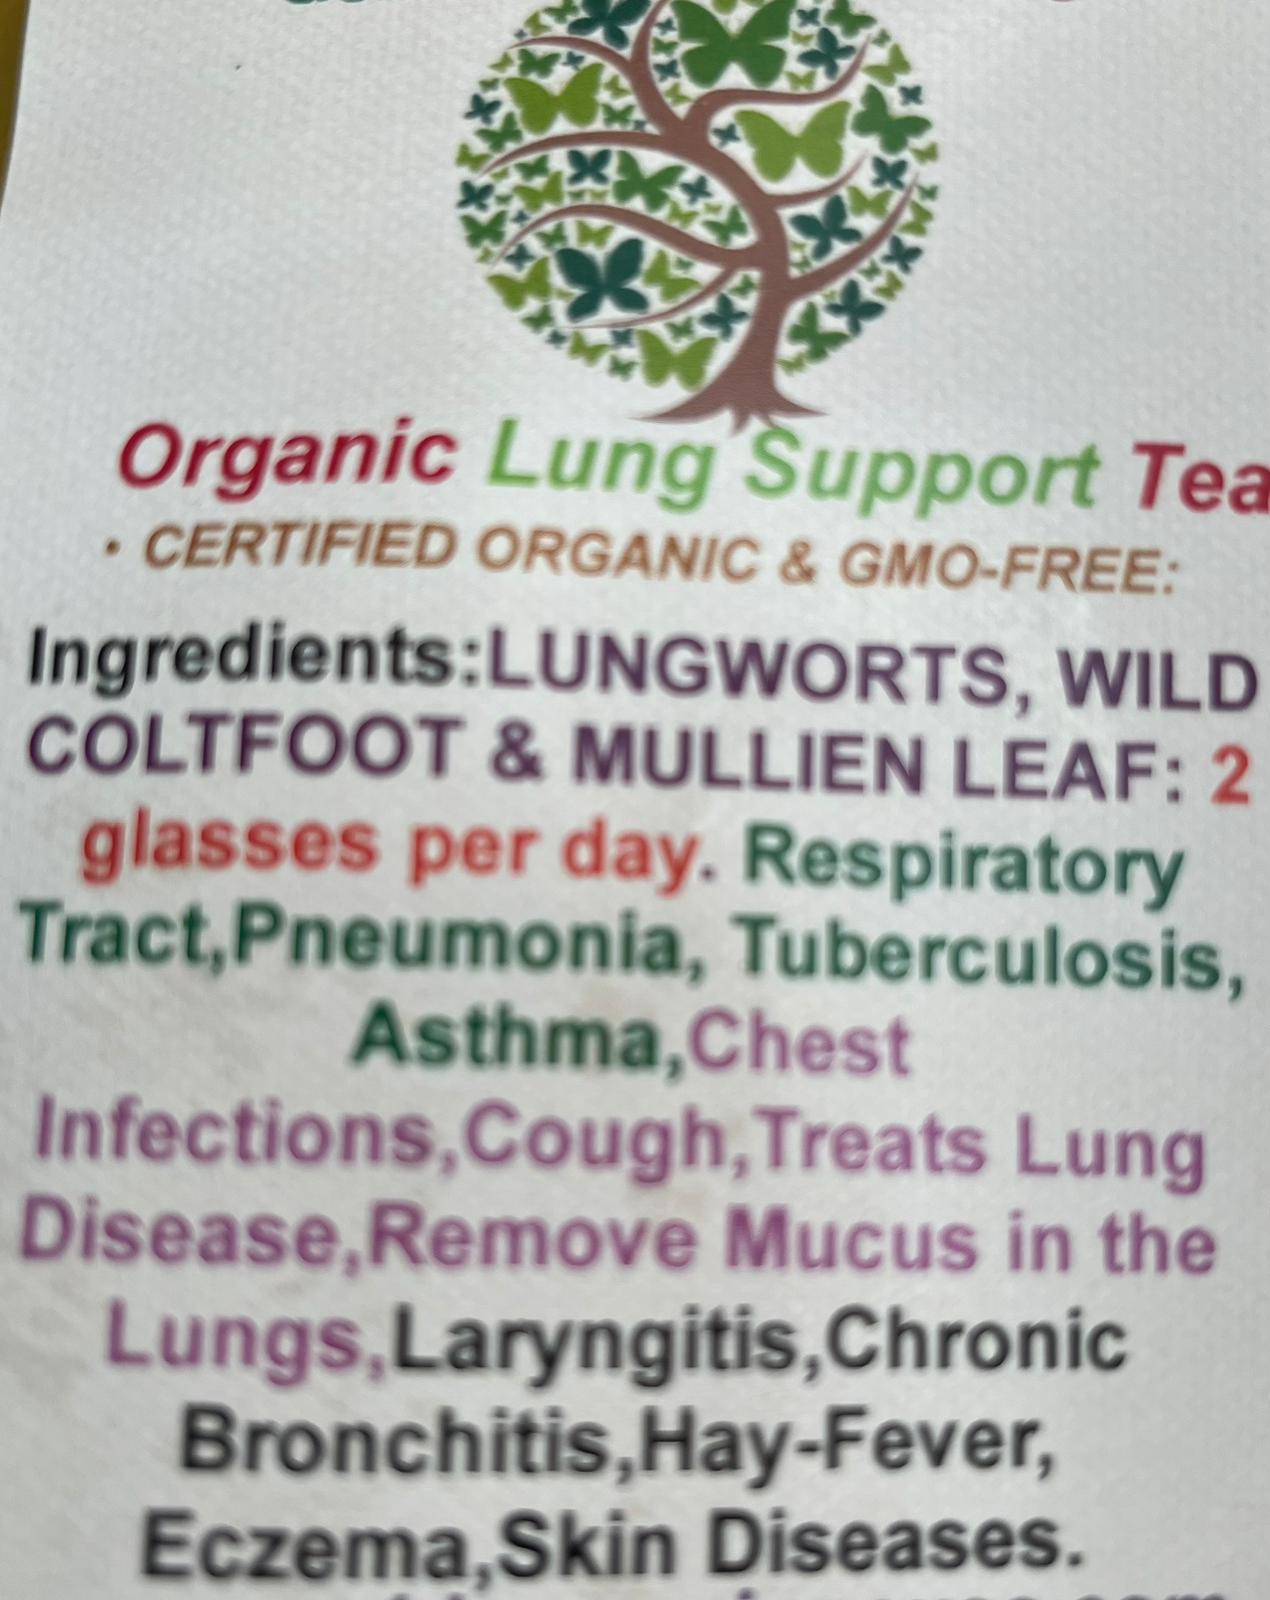 Lung Support Tea